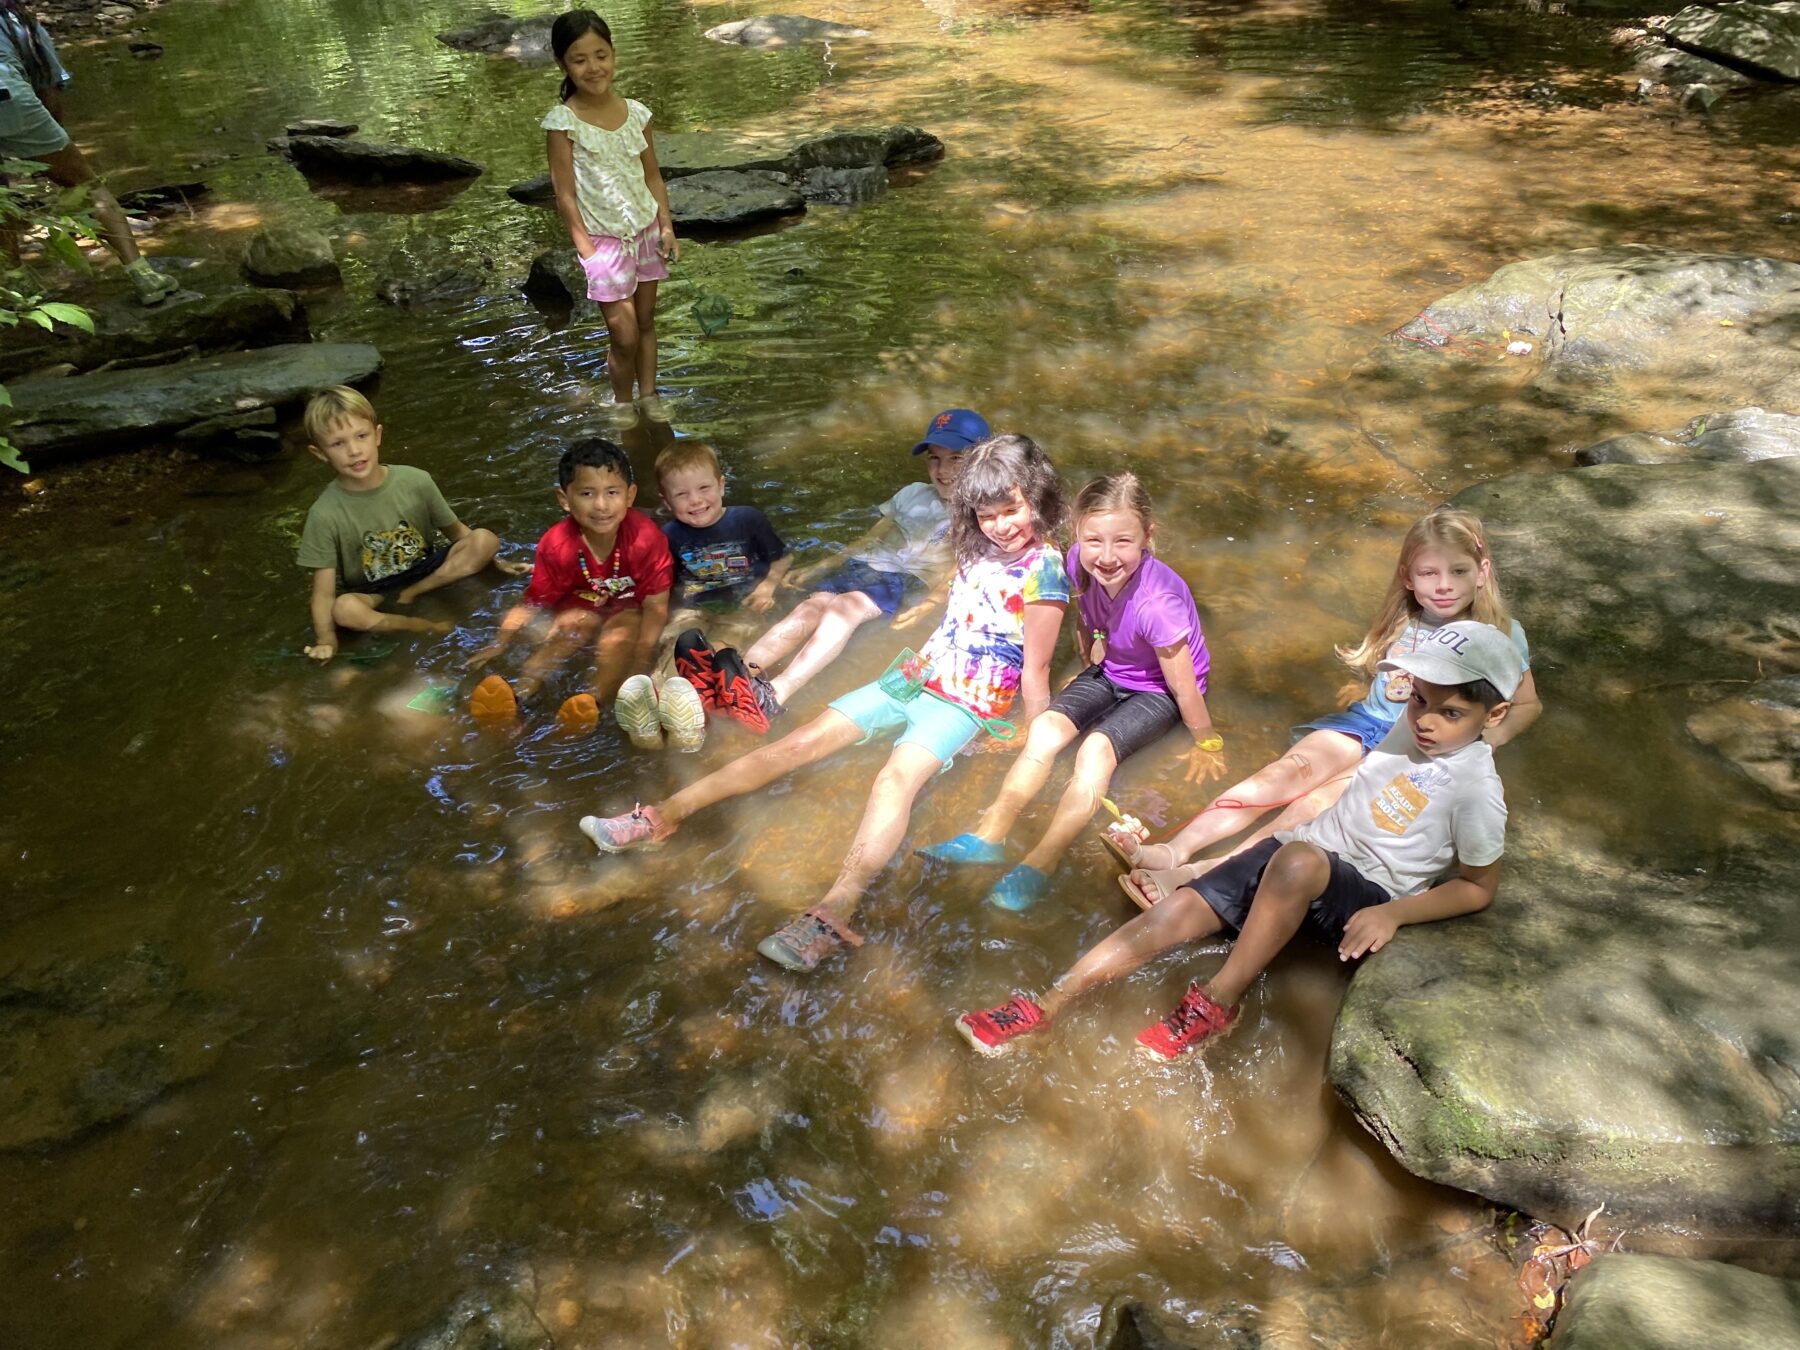 Nine kids are all sitting in a creek. The water is brown and the kids are dressed in shorts and t-shirts.